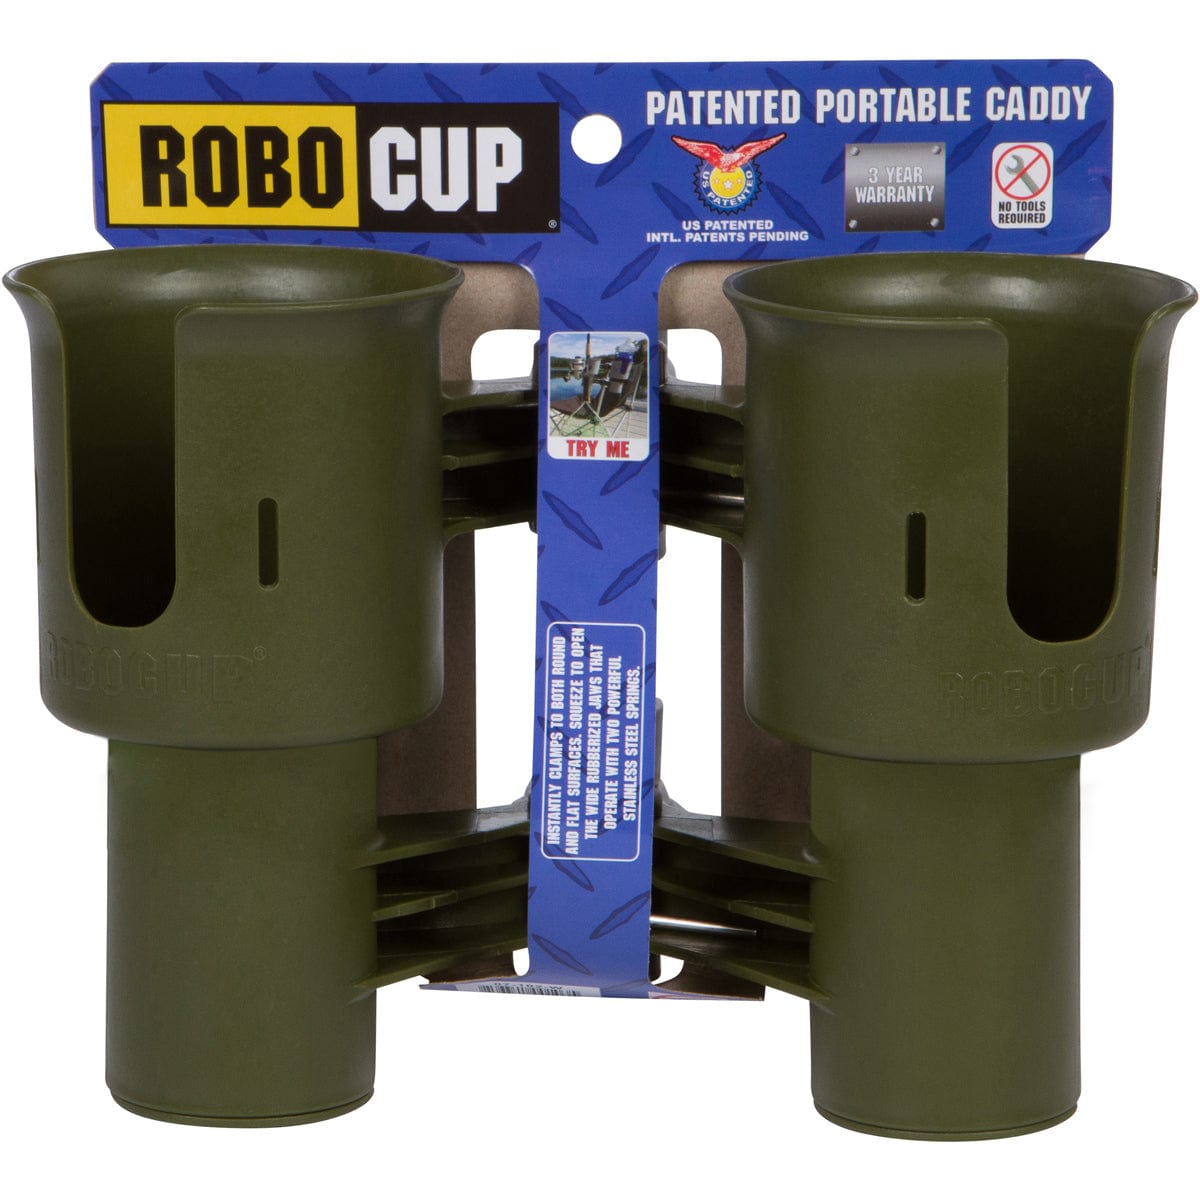 Robocup ROBOCUP, RED, Updated Version, Best Cup Holder for Drinks, Fishing  Rod/Pole, Boat, Beach Chair, Golf Cart, Wheelchair, Walker, D